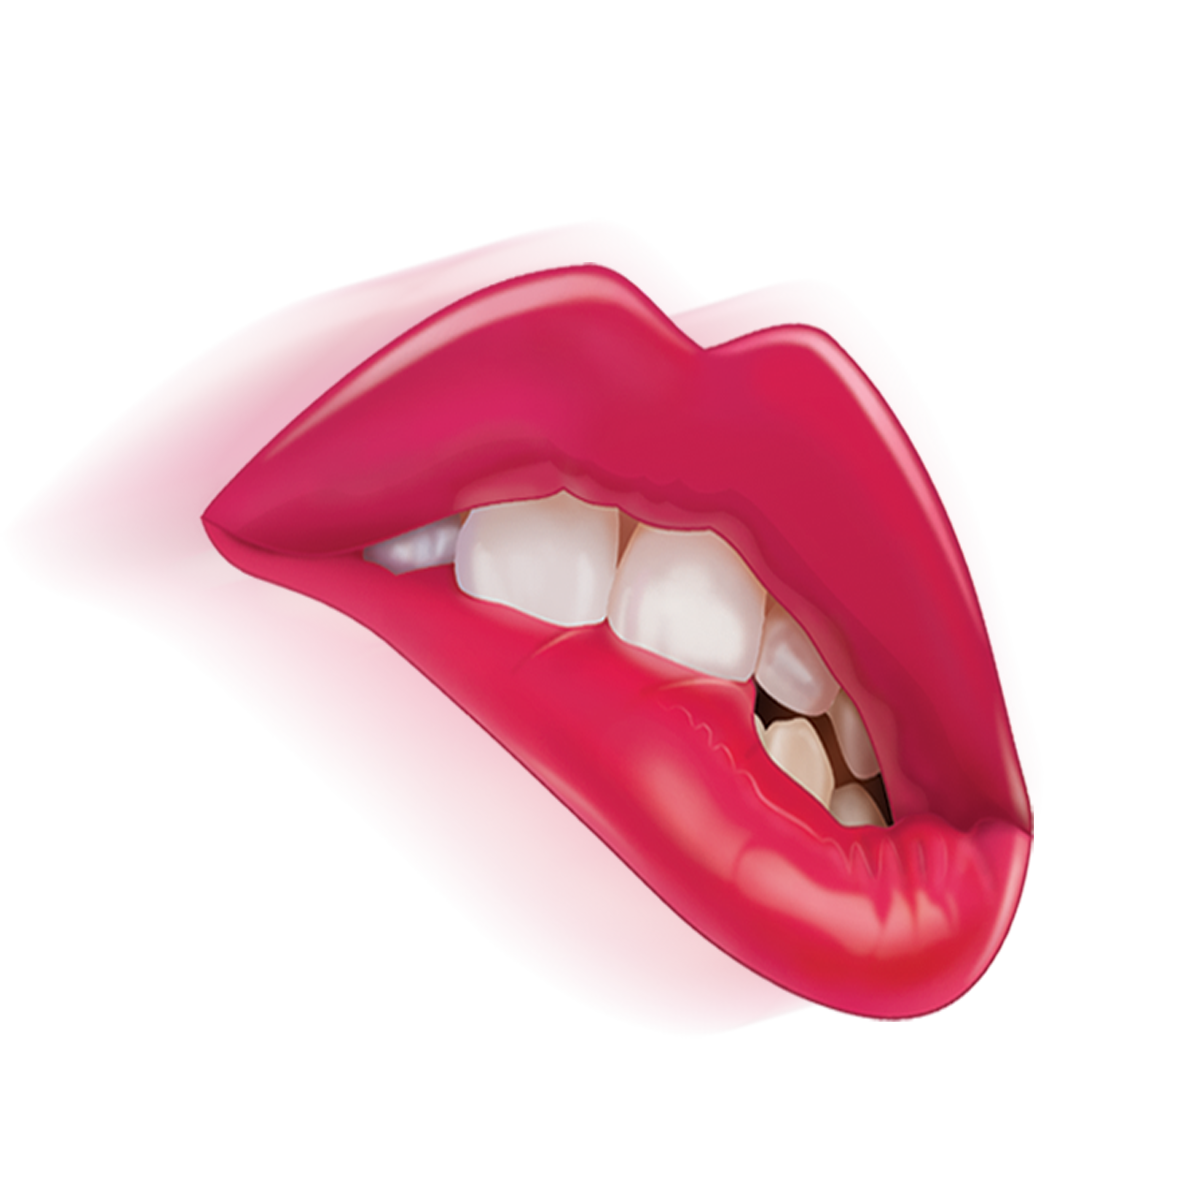 Tooth Lip Biting - Bite lips png download - 1181*1181 - Free.